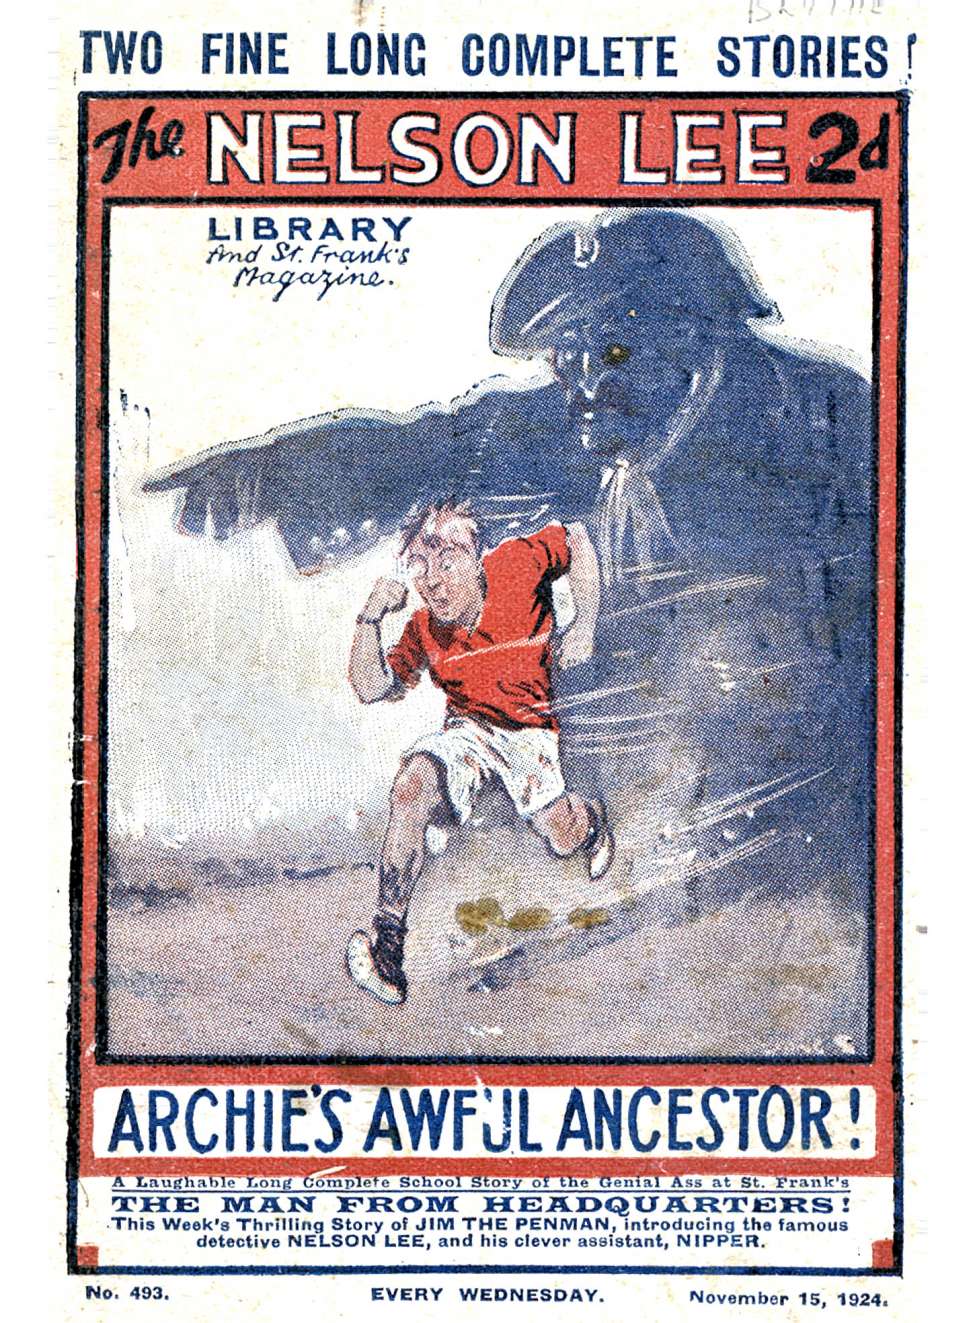 Comic Book Cover For Nelson Lee Library s1 493 - Archie’s Awful Ancestor